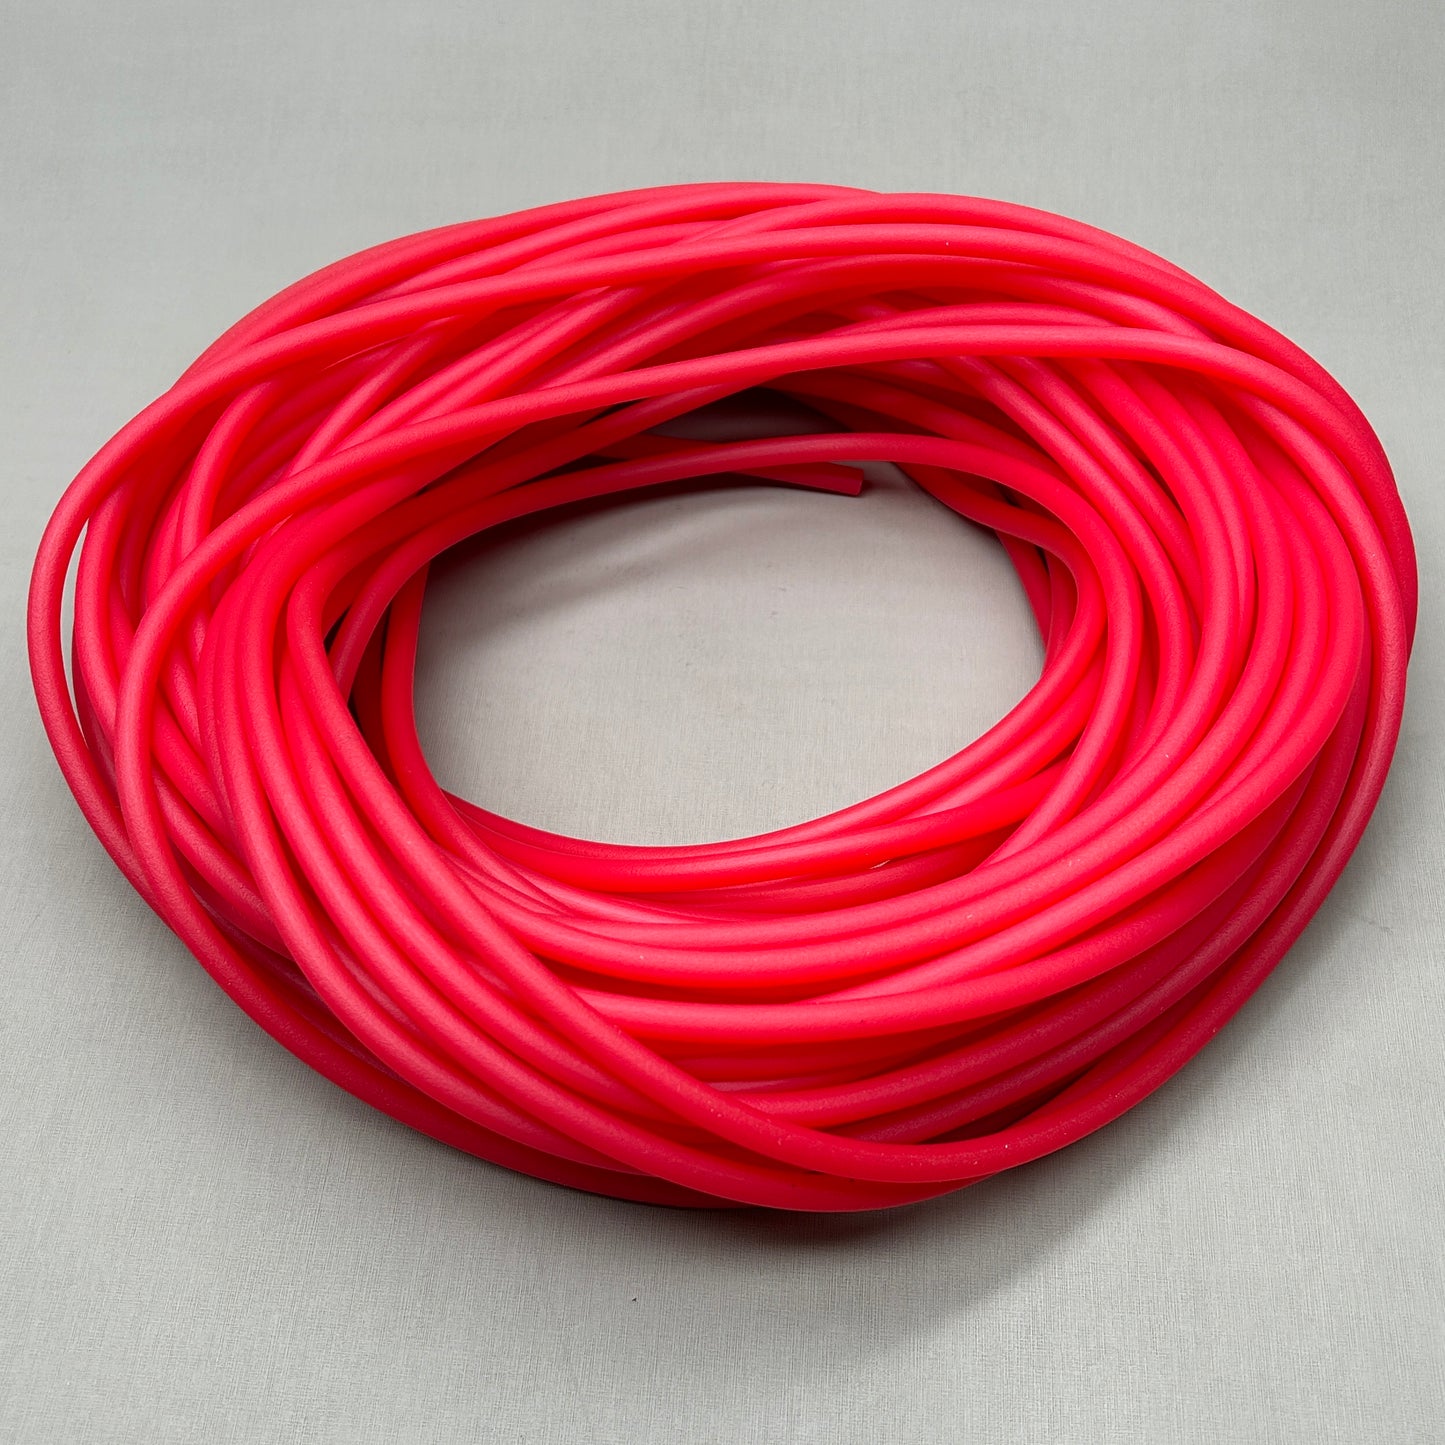 CANDO Latex-Free Exercise Tubing Light 100 ft Red (New)